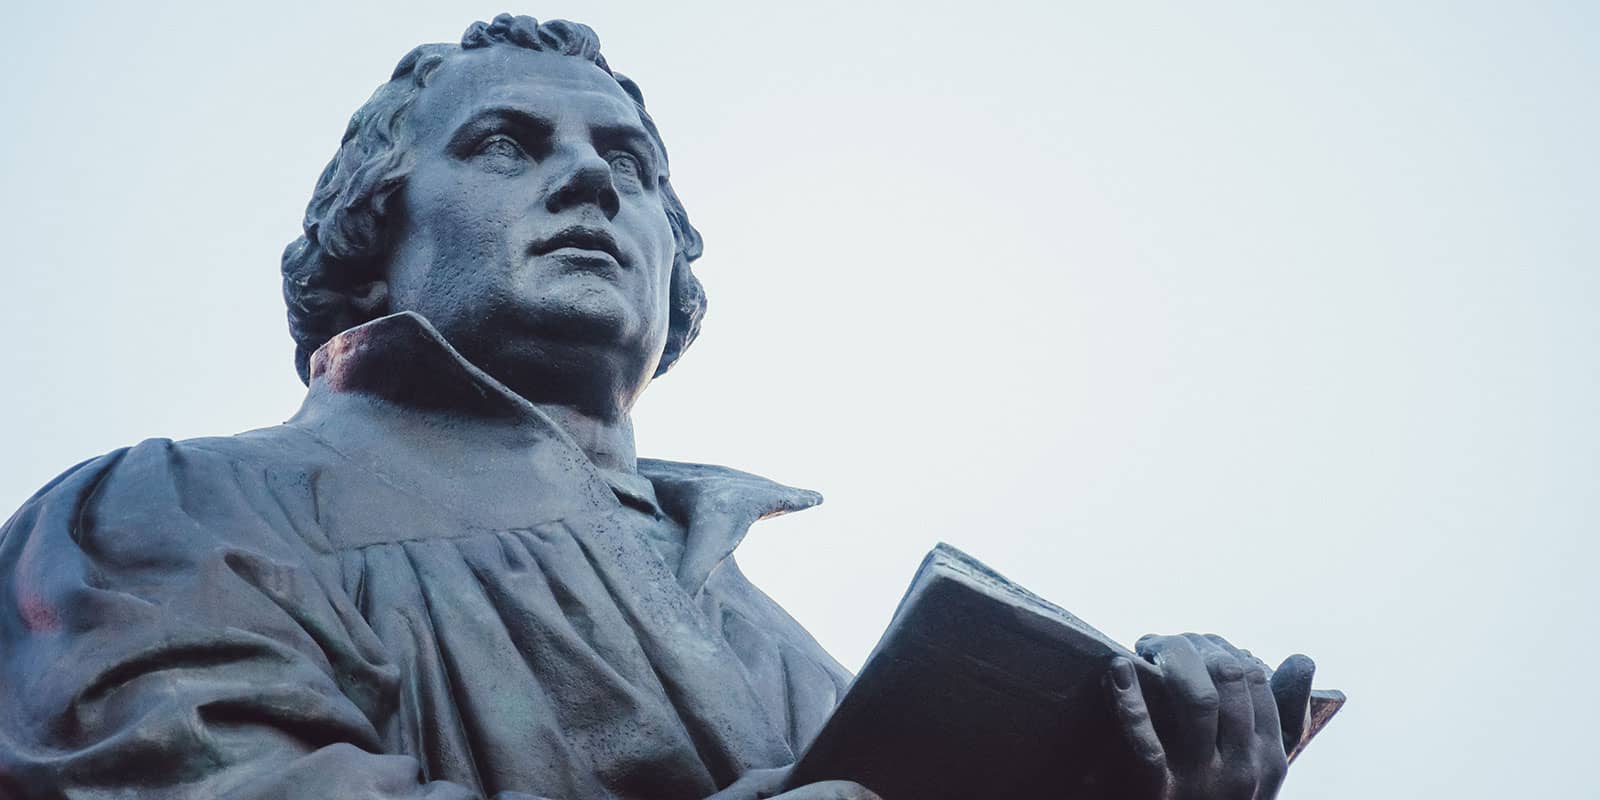 Close up of a stone statue of Martin Luther